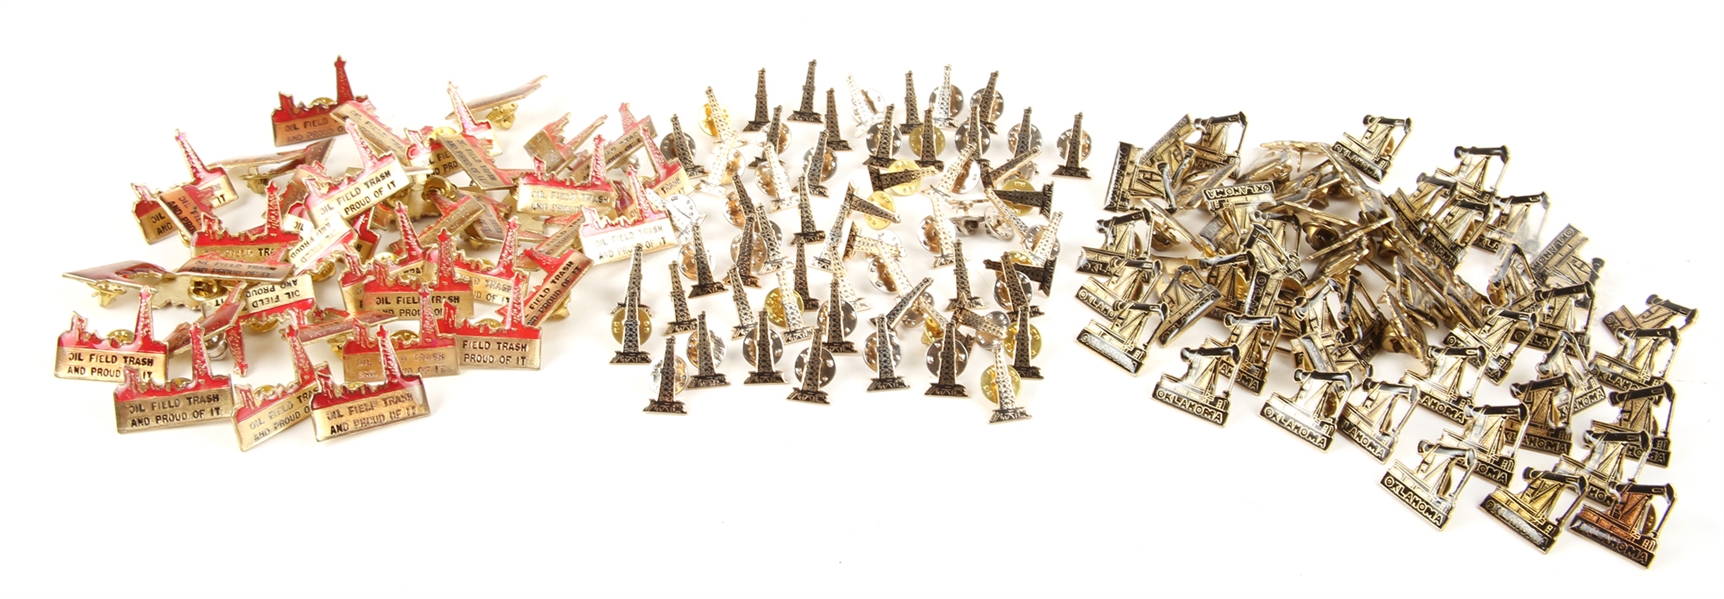 OIL FIELD, OIL DERRICK AND OKLAHOMA PINS - LOT OF 150